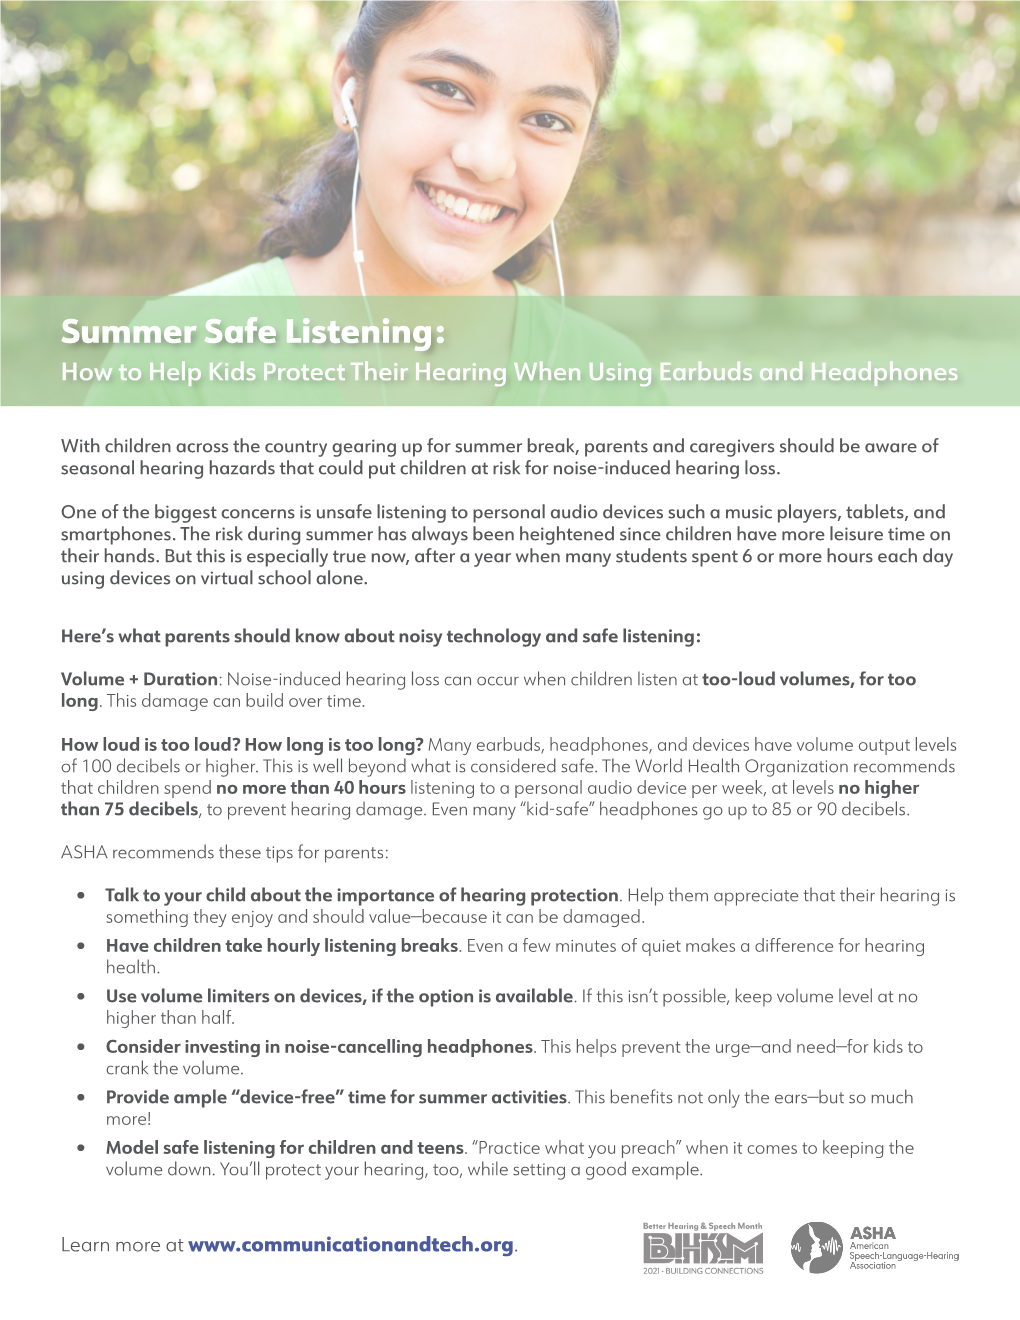 Summer Safe Listening: How to Help Kids Protect Their Hearing When Using Earbuds and Headphones